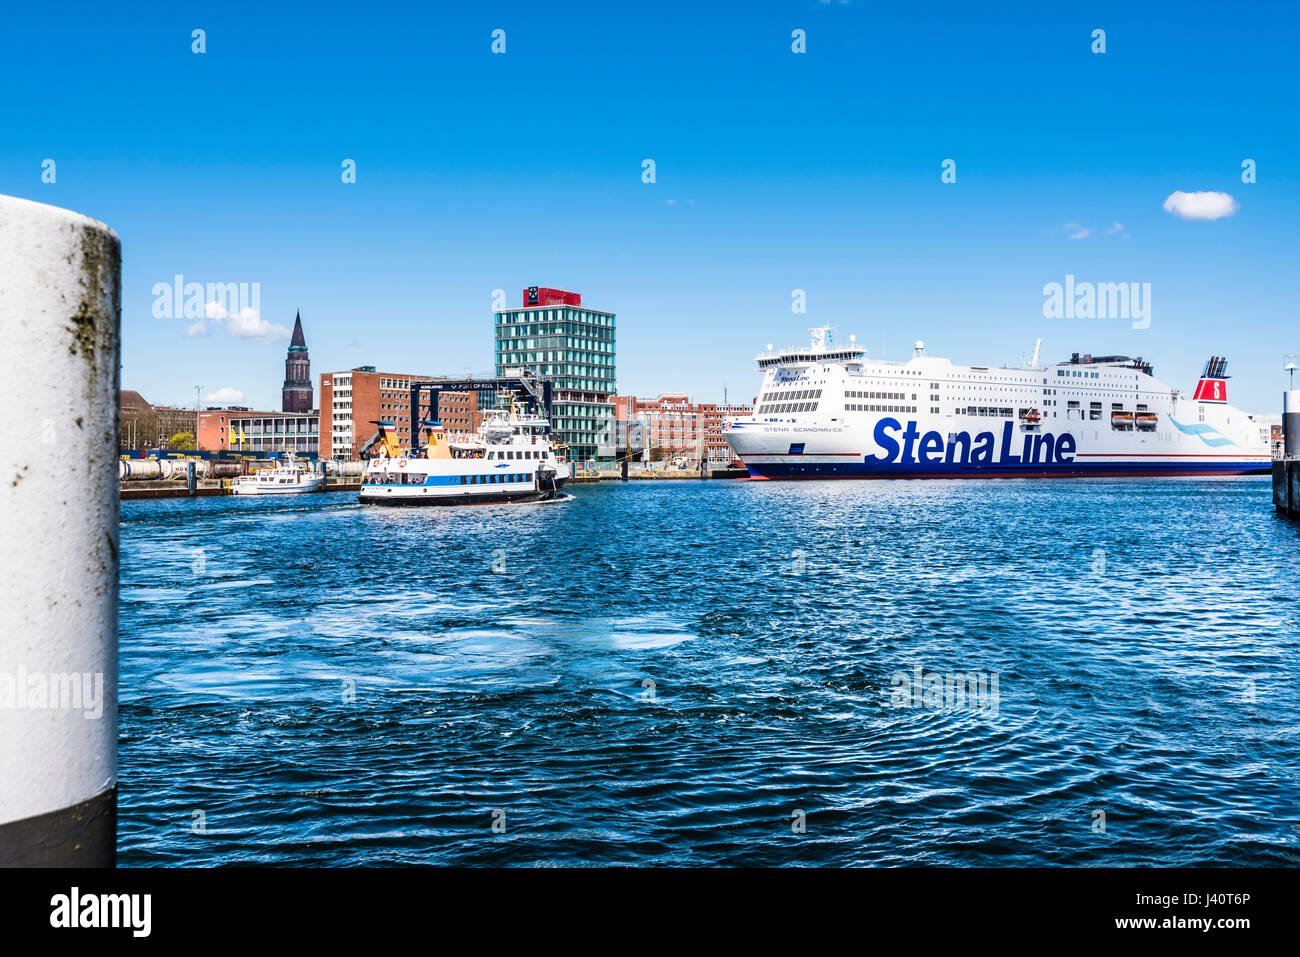 The ferry to Sweden and the passenger ferry on the Kieler Förde in the harbour with the city hall tower, Kiel, Schleswig Holstein, Germany Stock Photo